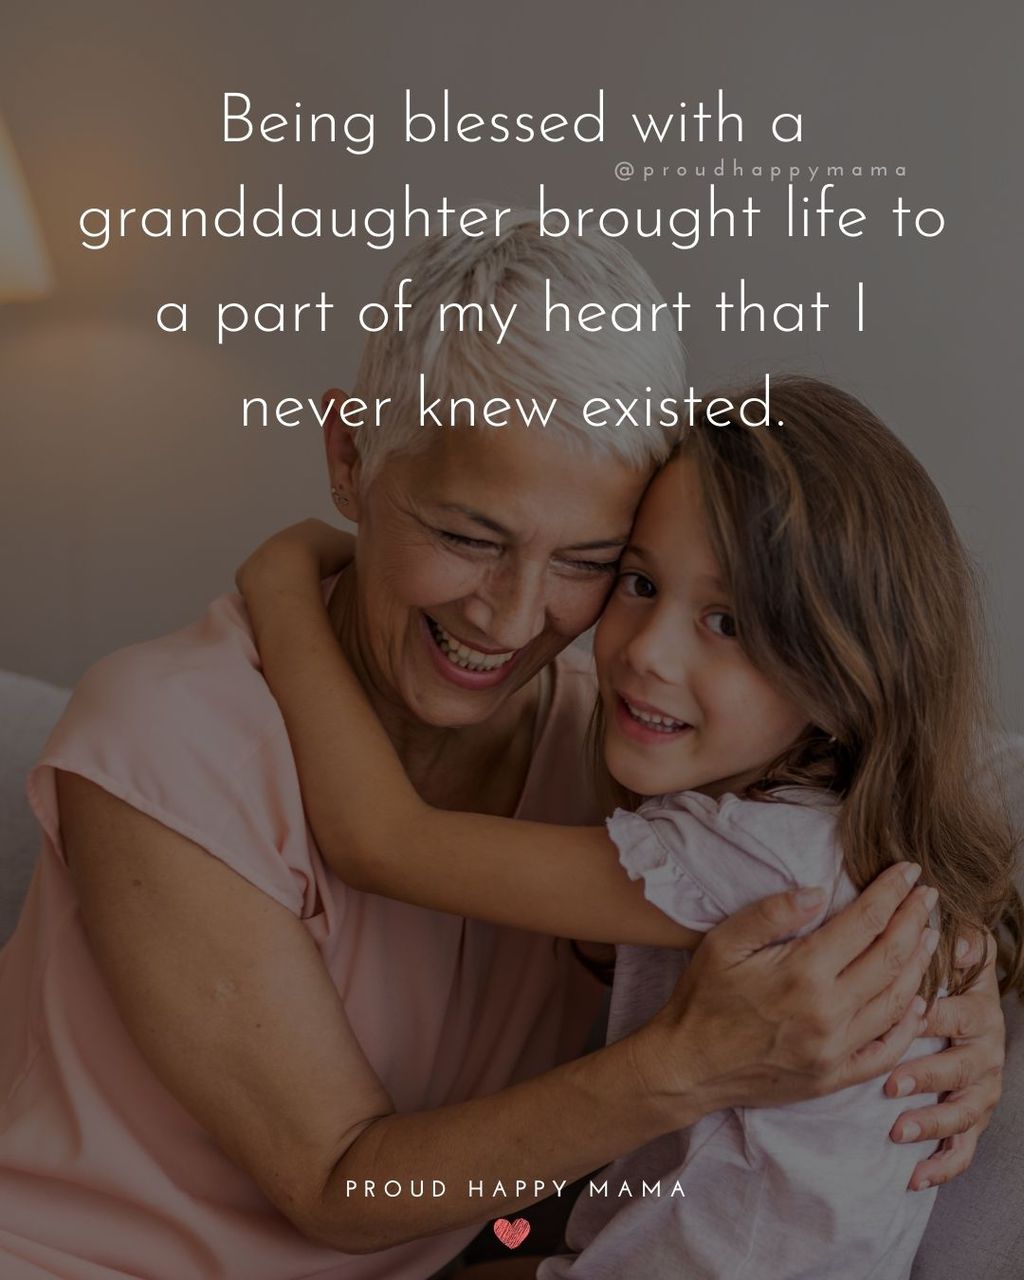 Grandma hugging granddaughter with granddaughter facing the camera. My granddaughter quote text overlay, ‘Being blessed with a granddaughter brought life to a part of my heart that I never knew existed.’